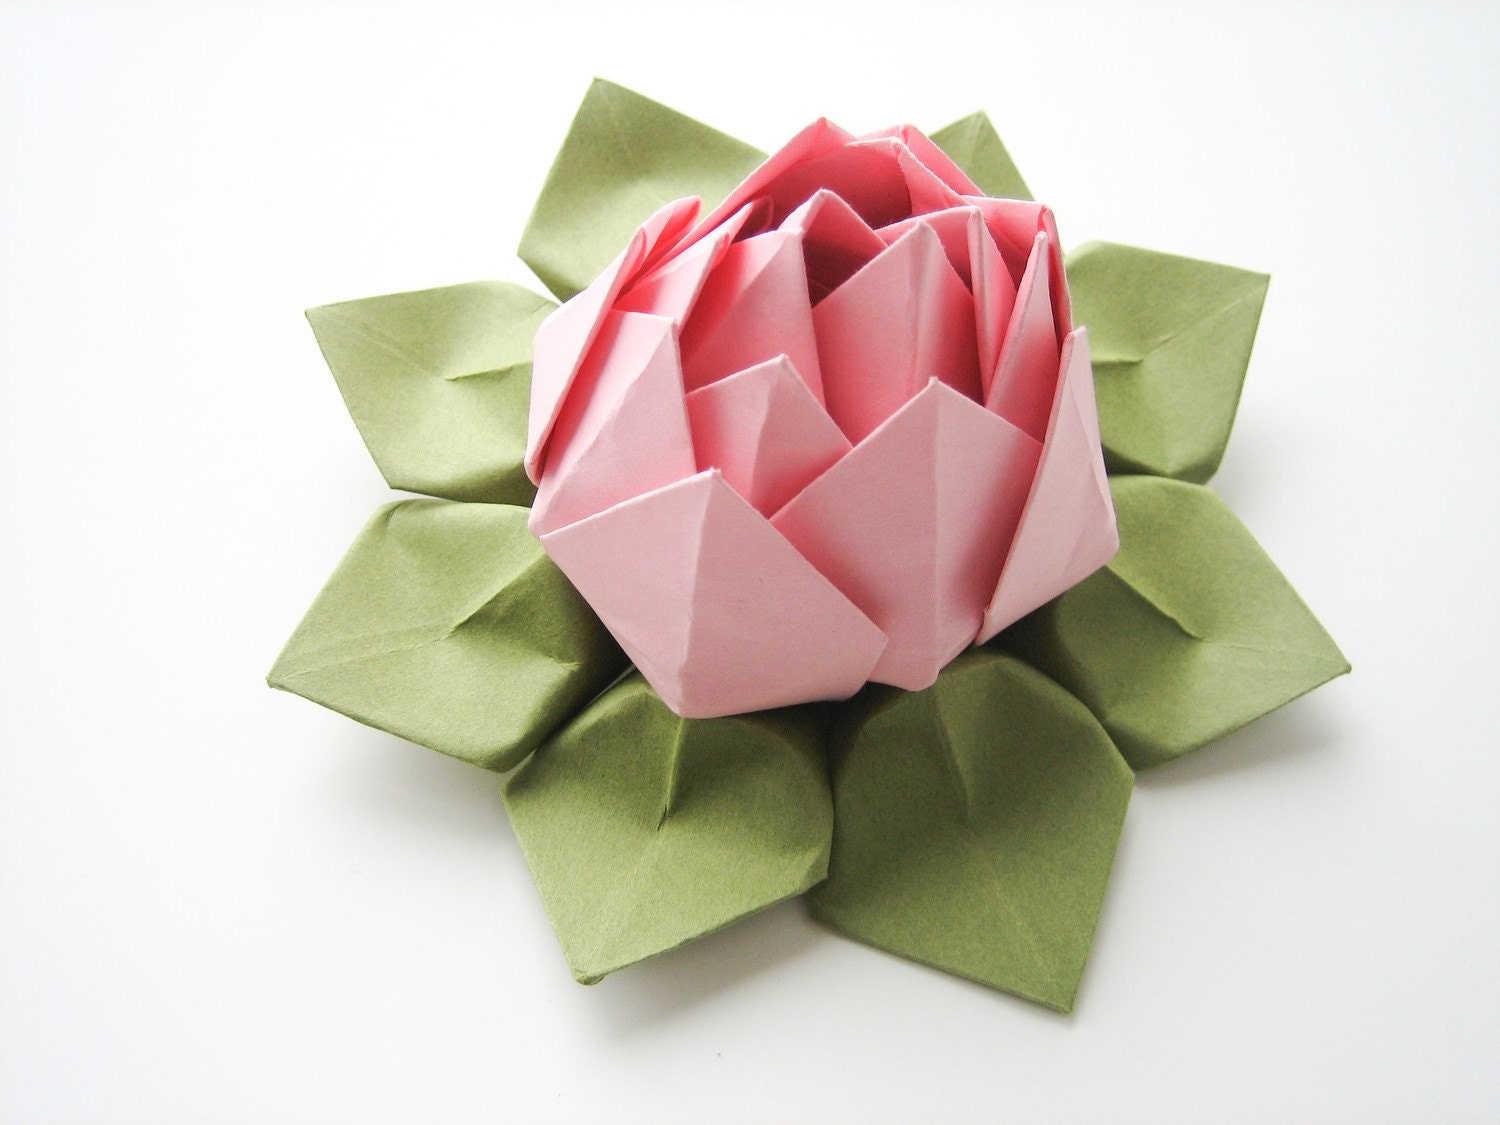 Handmade Origami Lotus Flower Blossom Pink and Moss Green